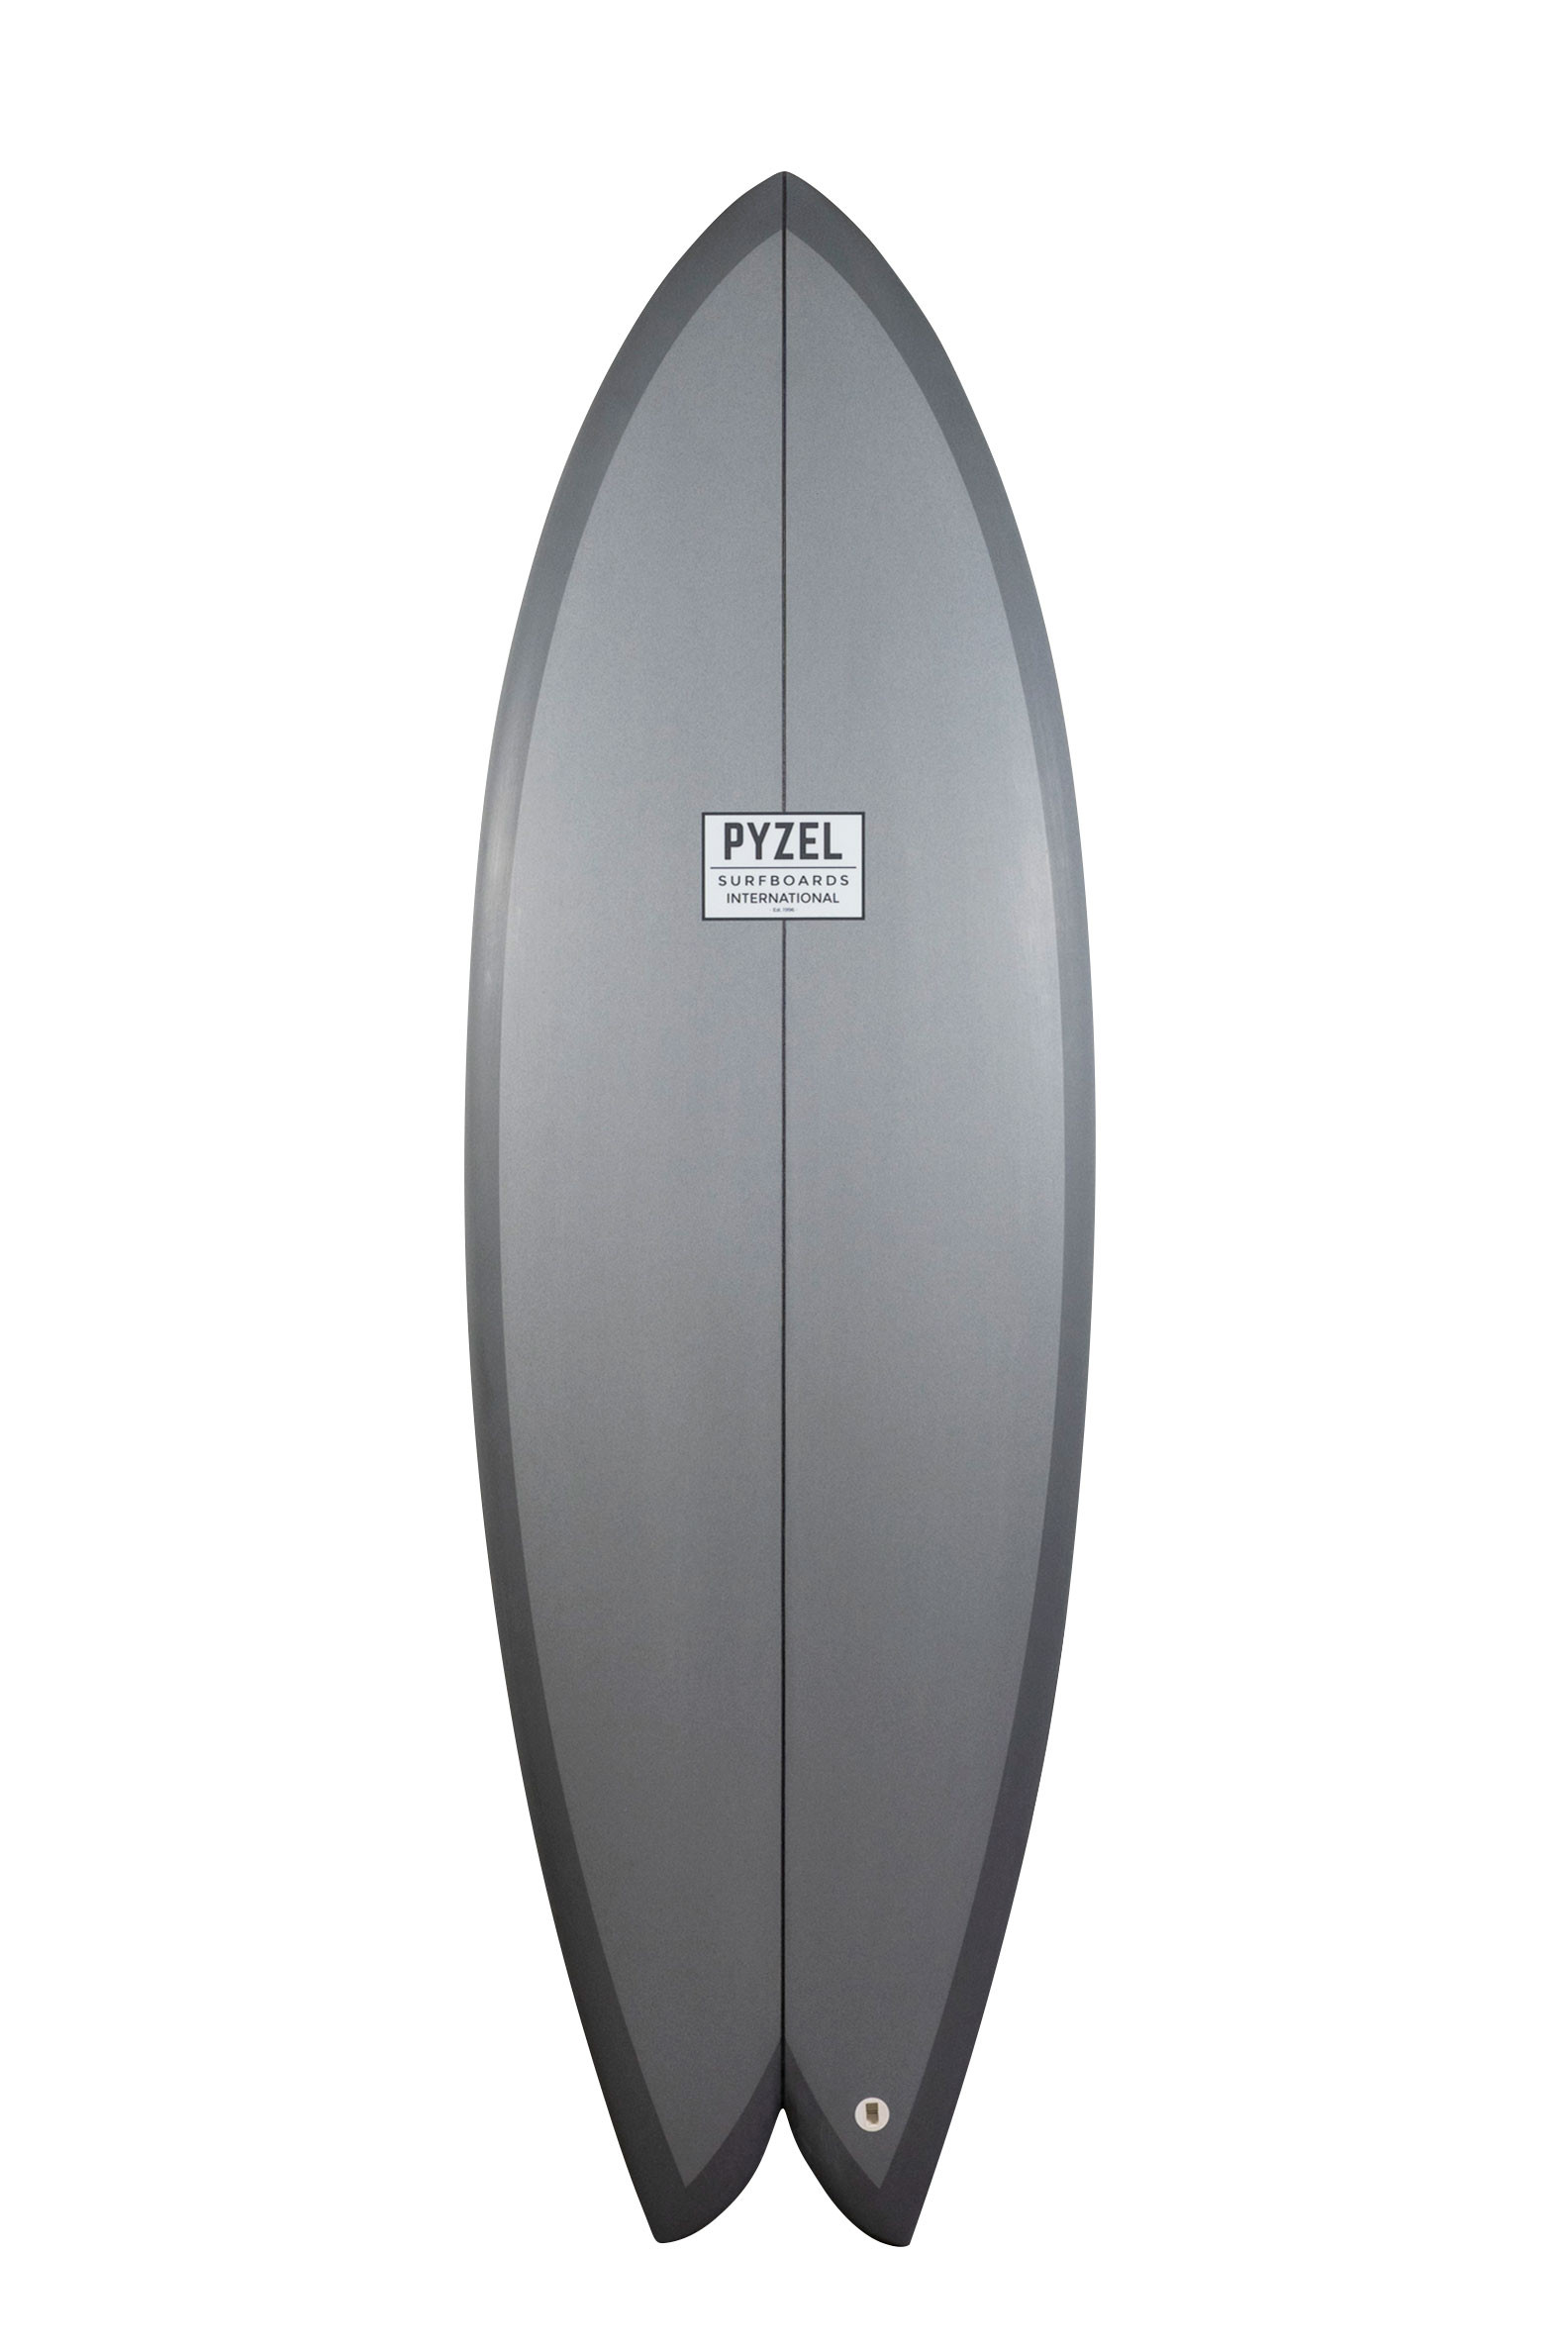 Pyzel Surfboards - Voyager 1